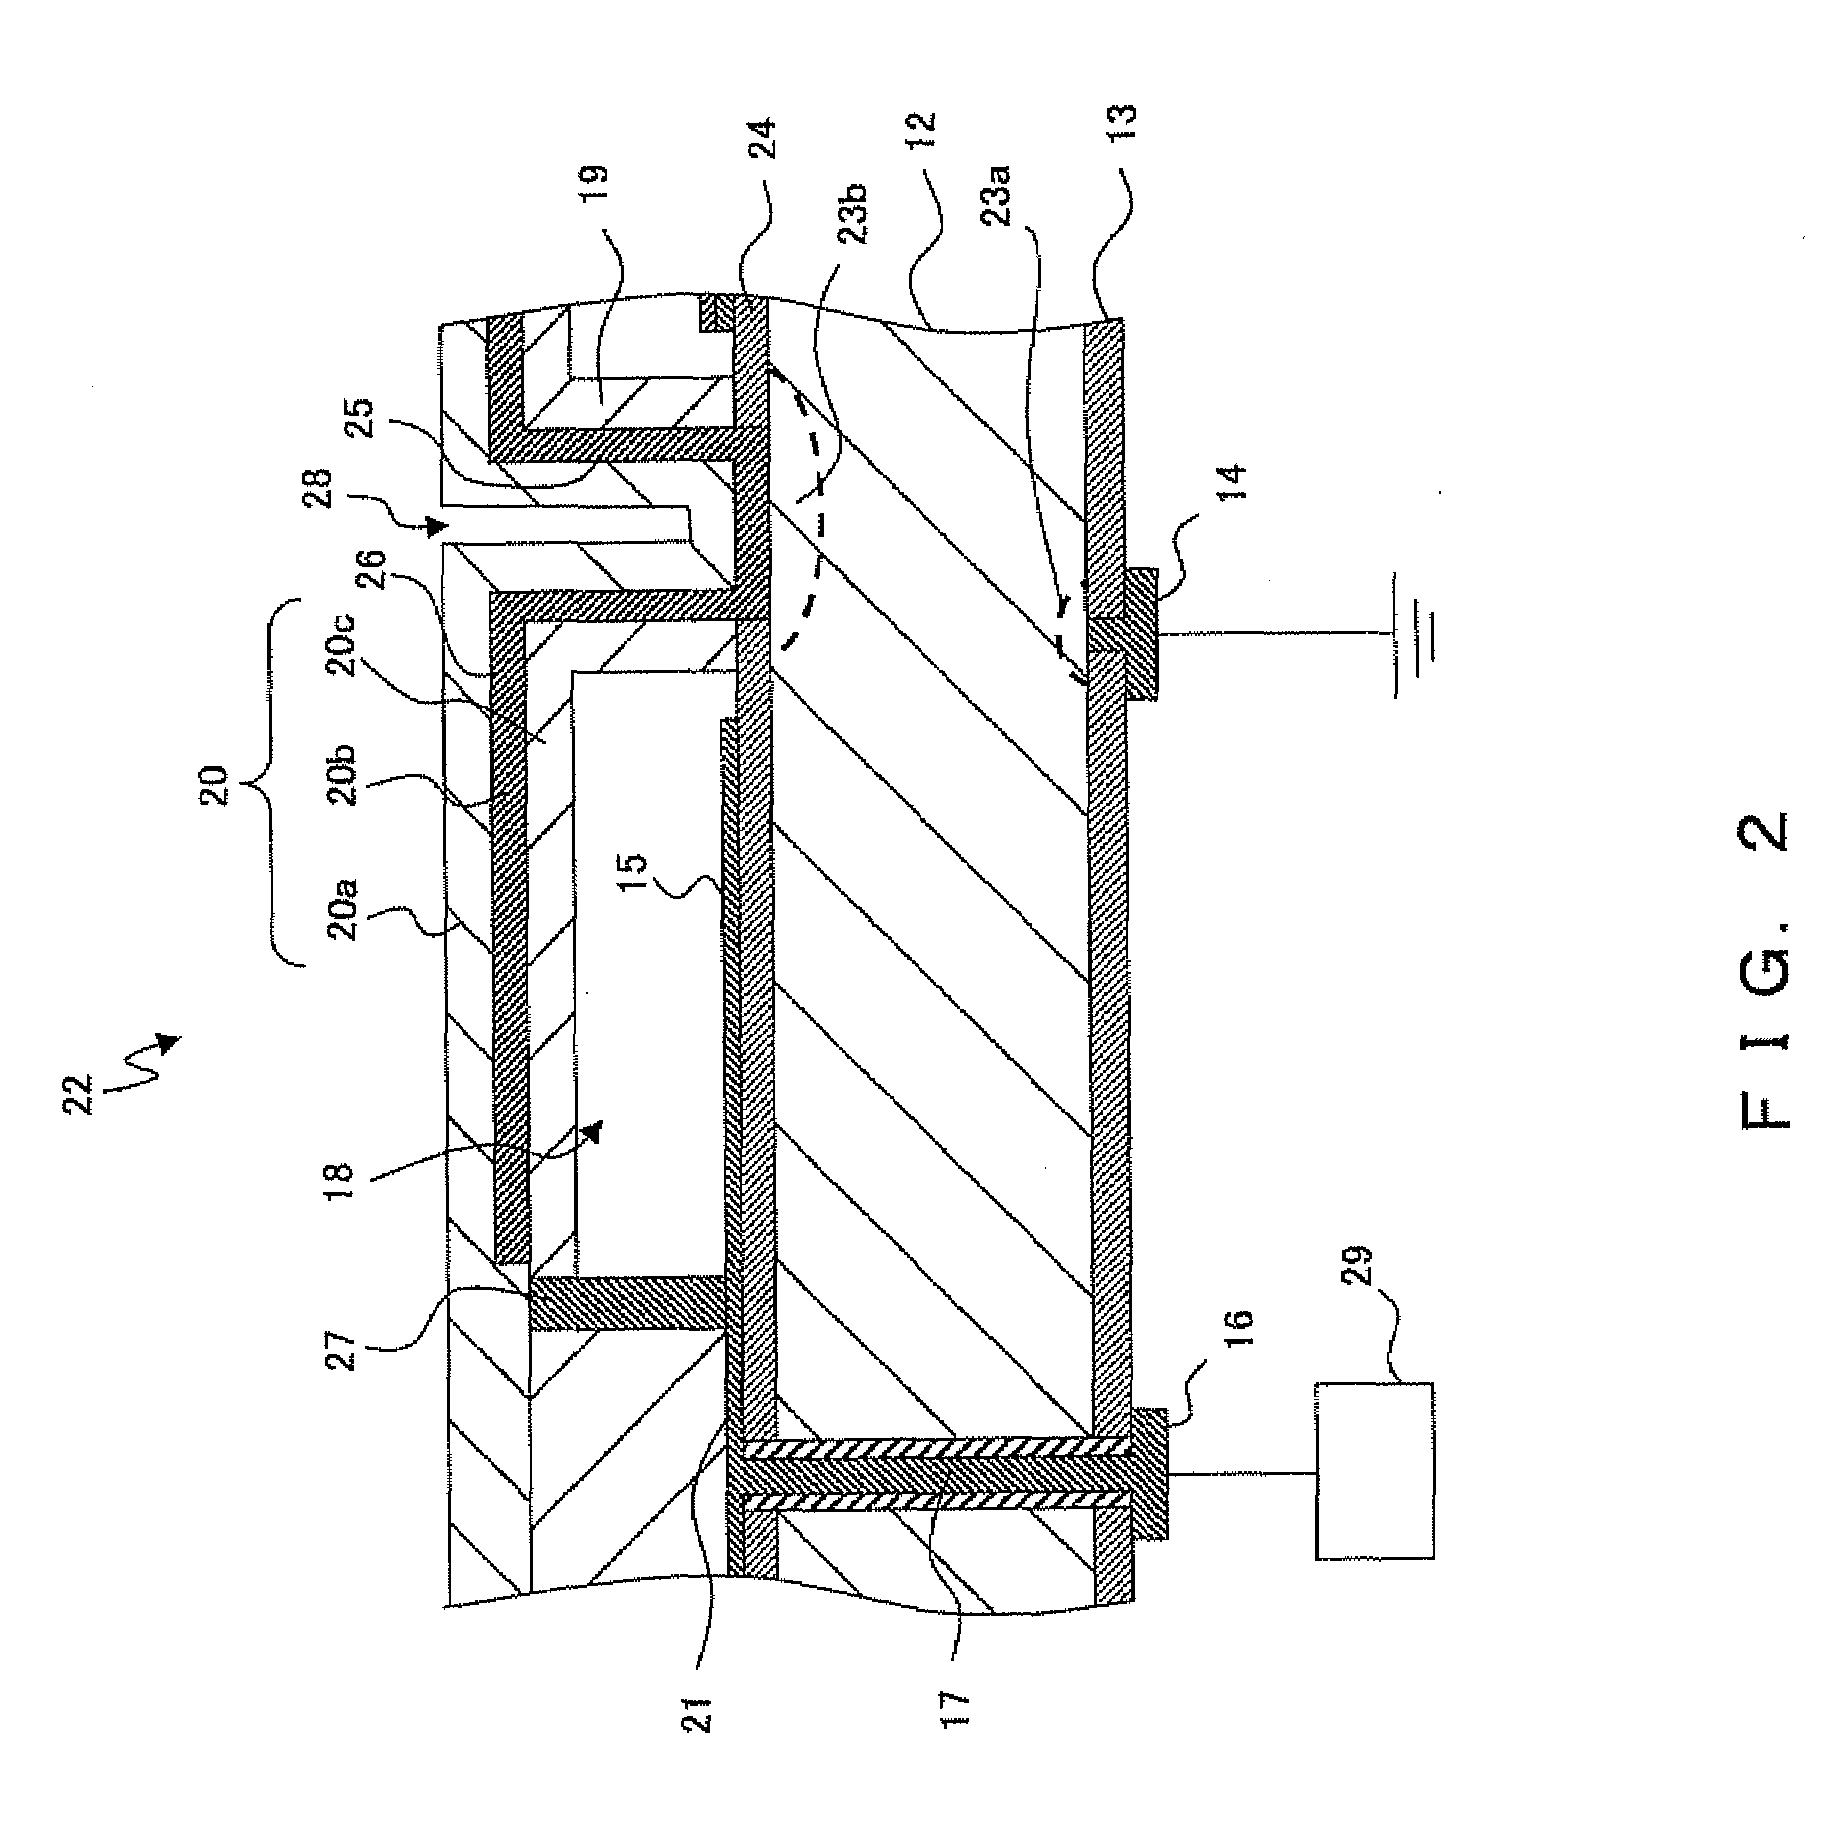 CAPACITIVE MICROMACHINED ULTRASONIC TRANSDUCER (cMUT) DEVICE AND IN-BODY-CAVITY DIAGNOSTIC ULTRASOUND SYSTEM